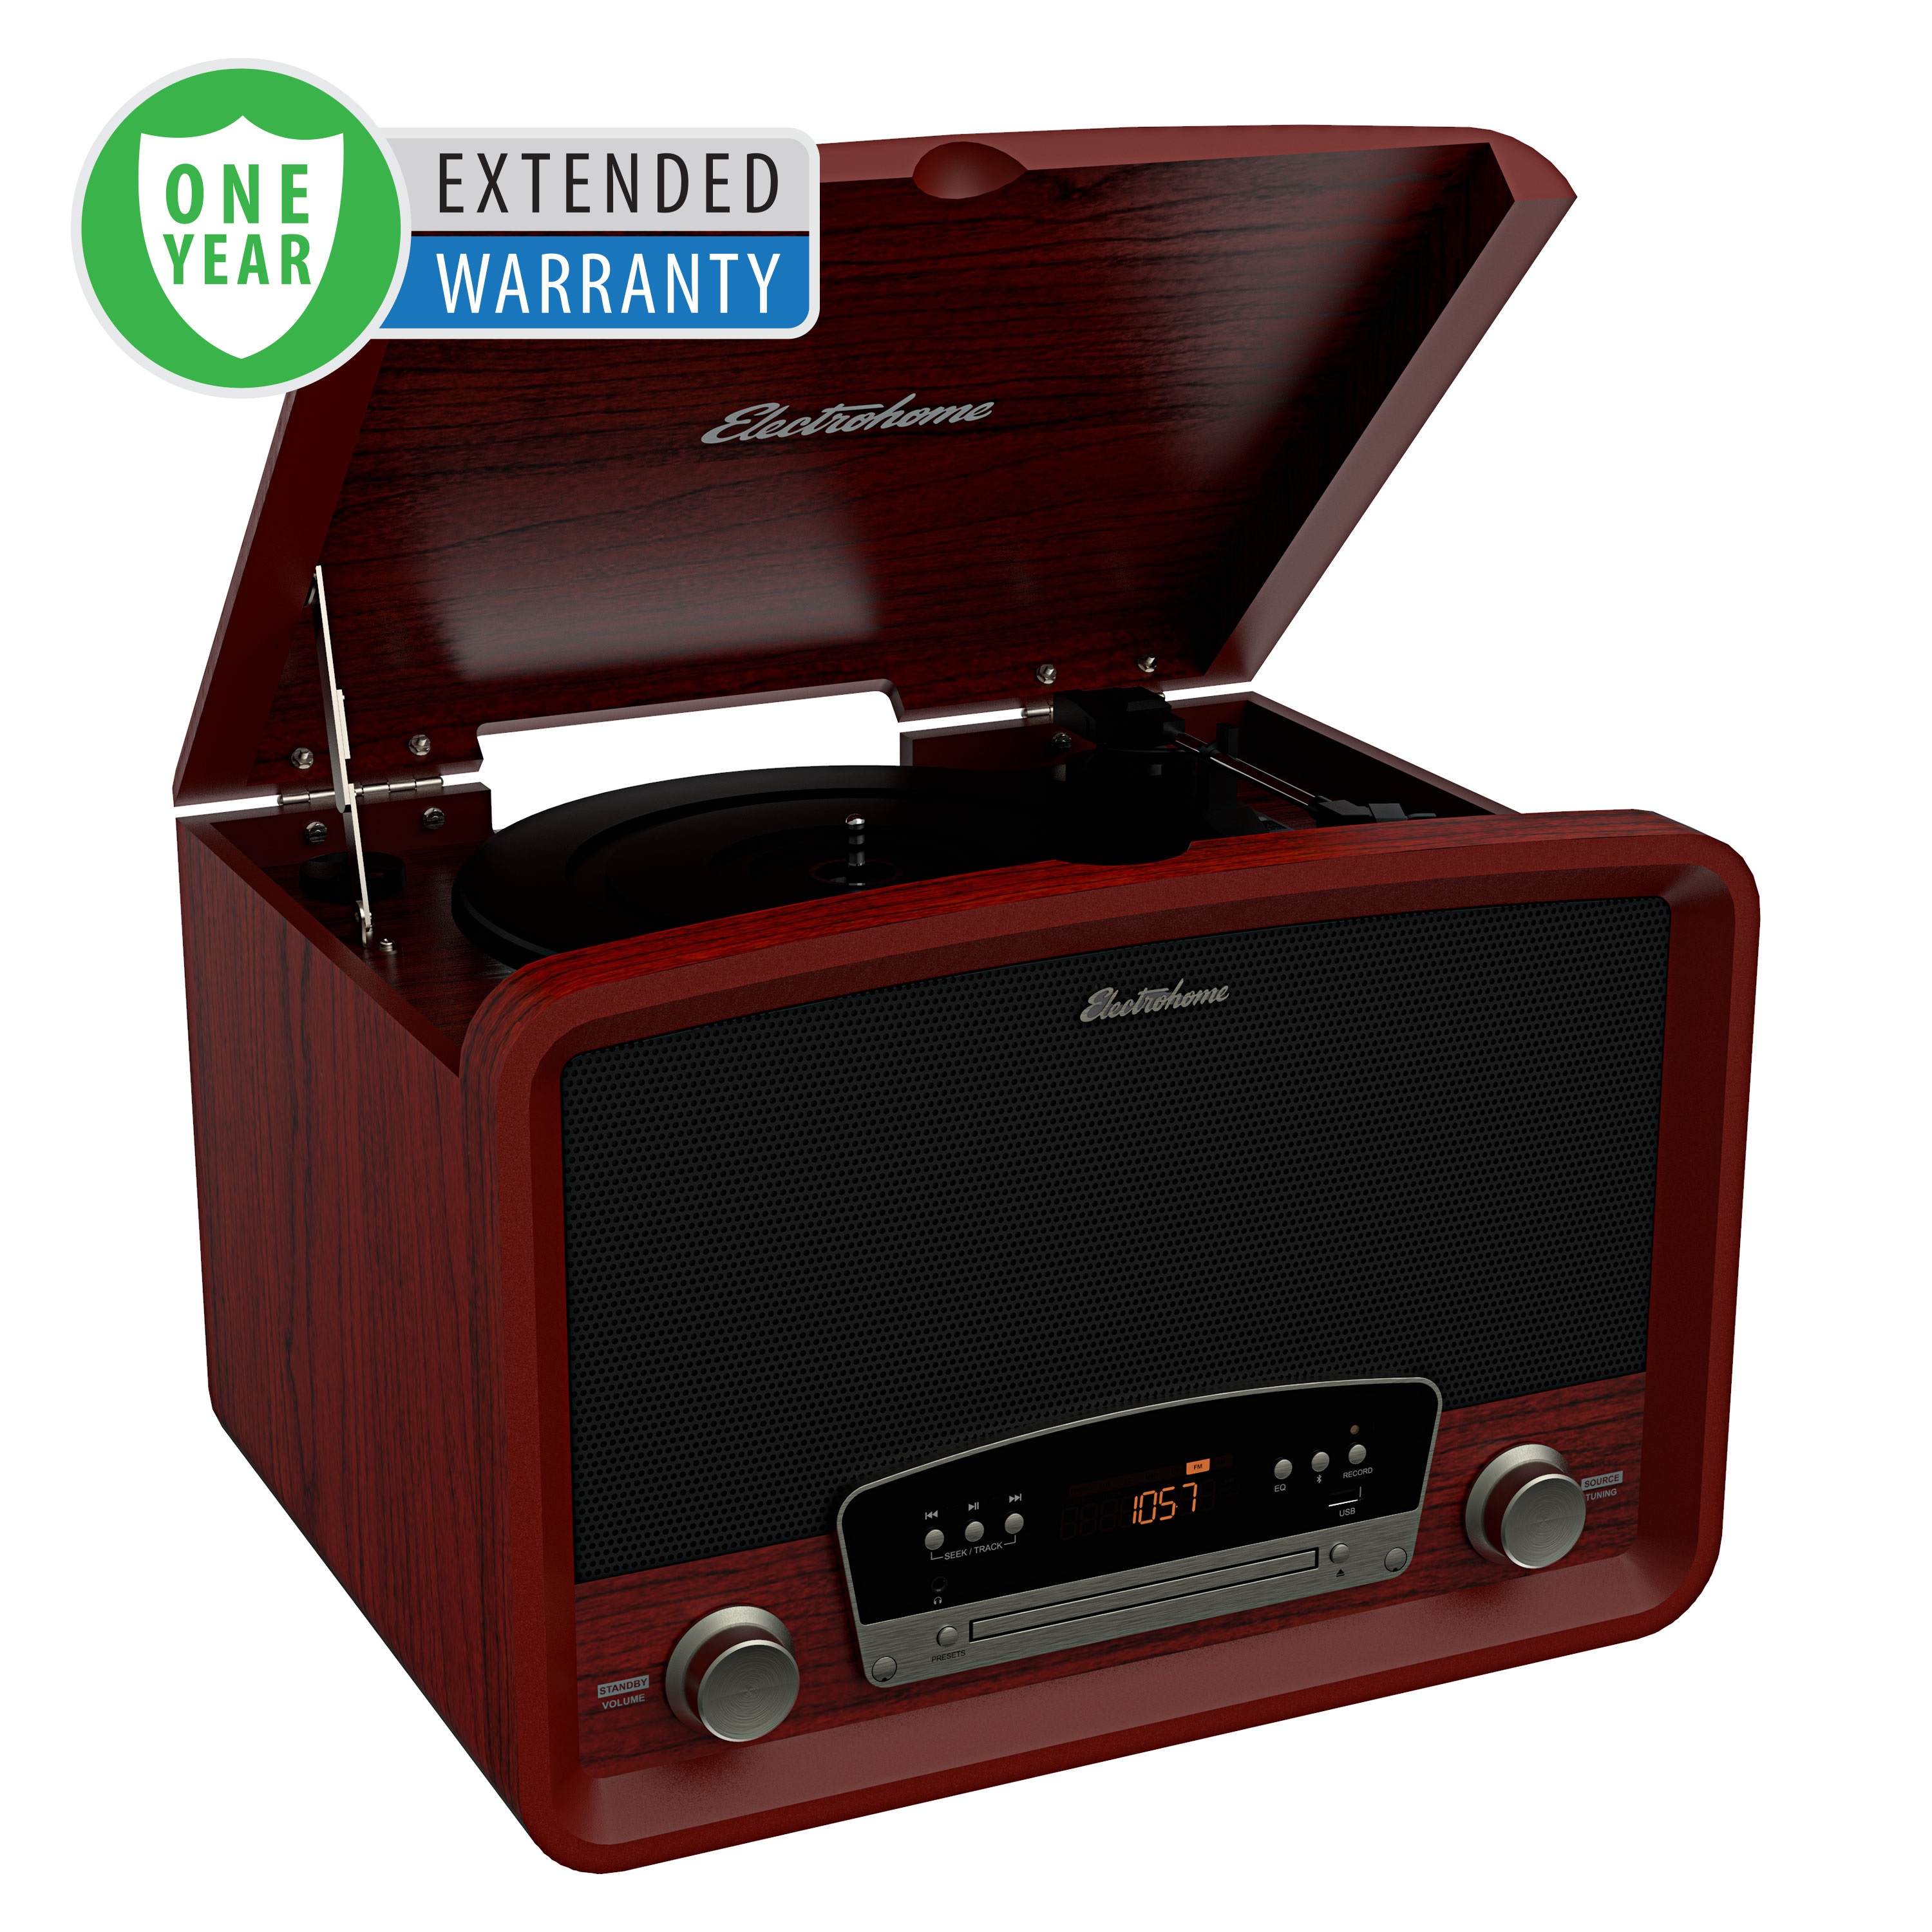 Electrohome Vinyl Record Player - 1 Year Extended Warranty - image 1 of 6